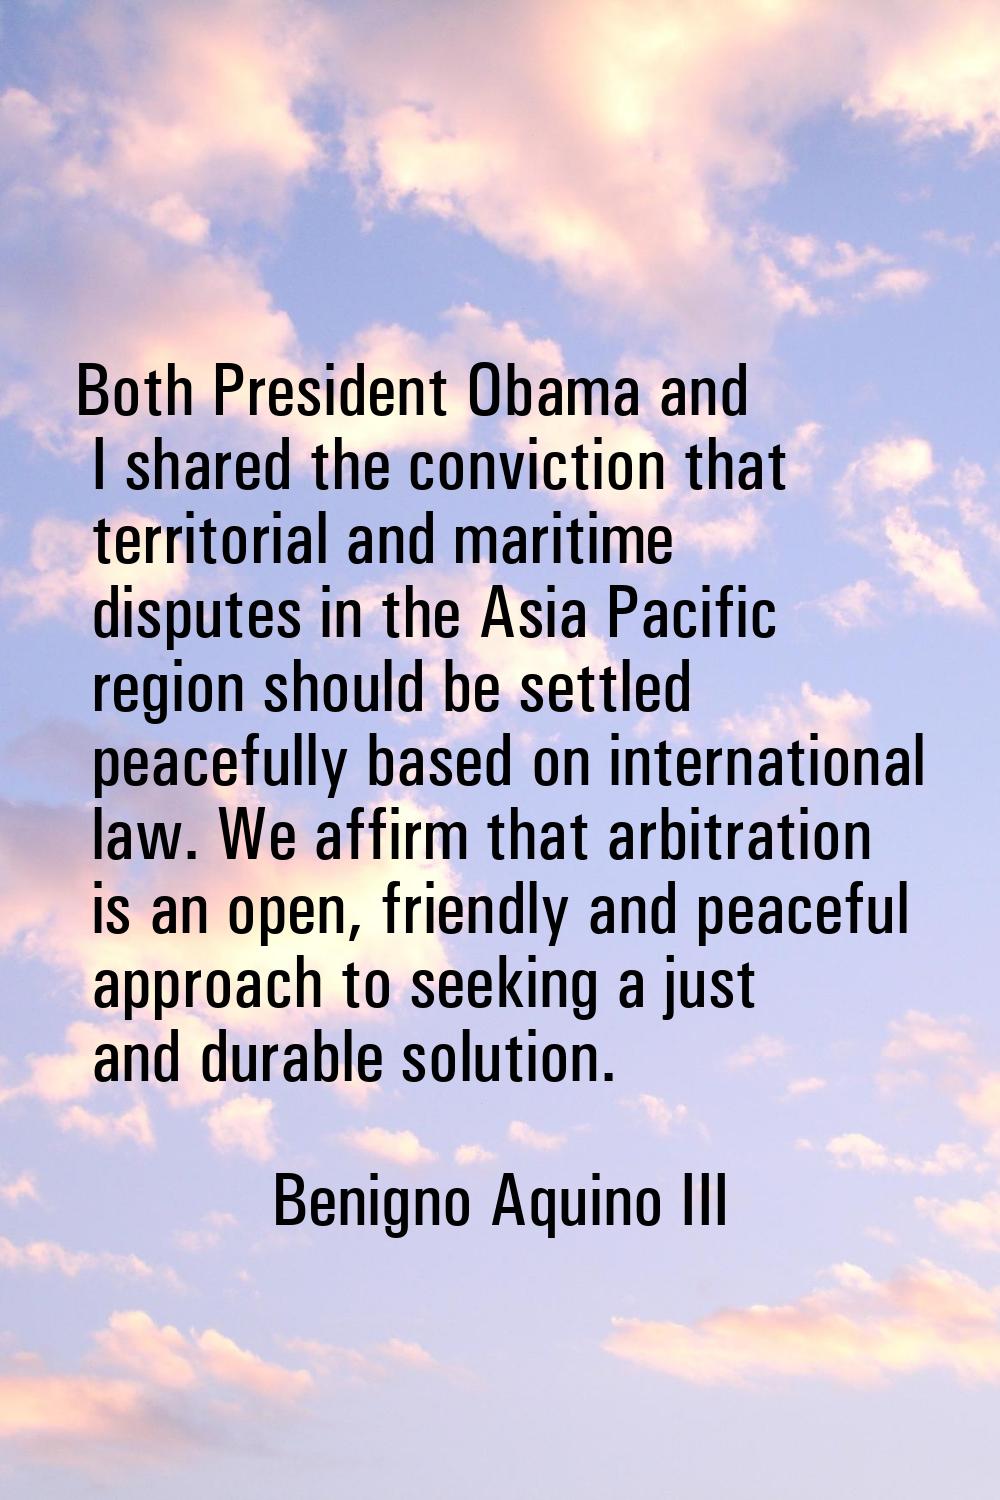 Both President Obama and I shared the conviction that territorial and maritime disputes in the Asia